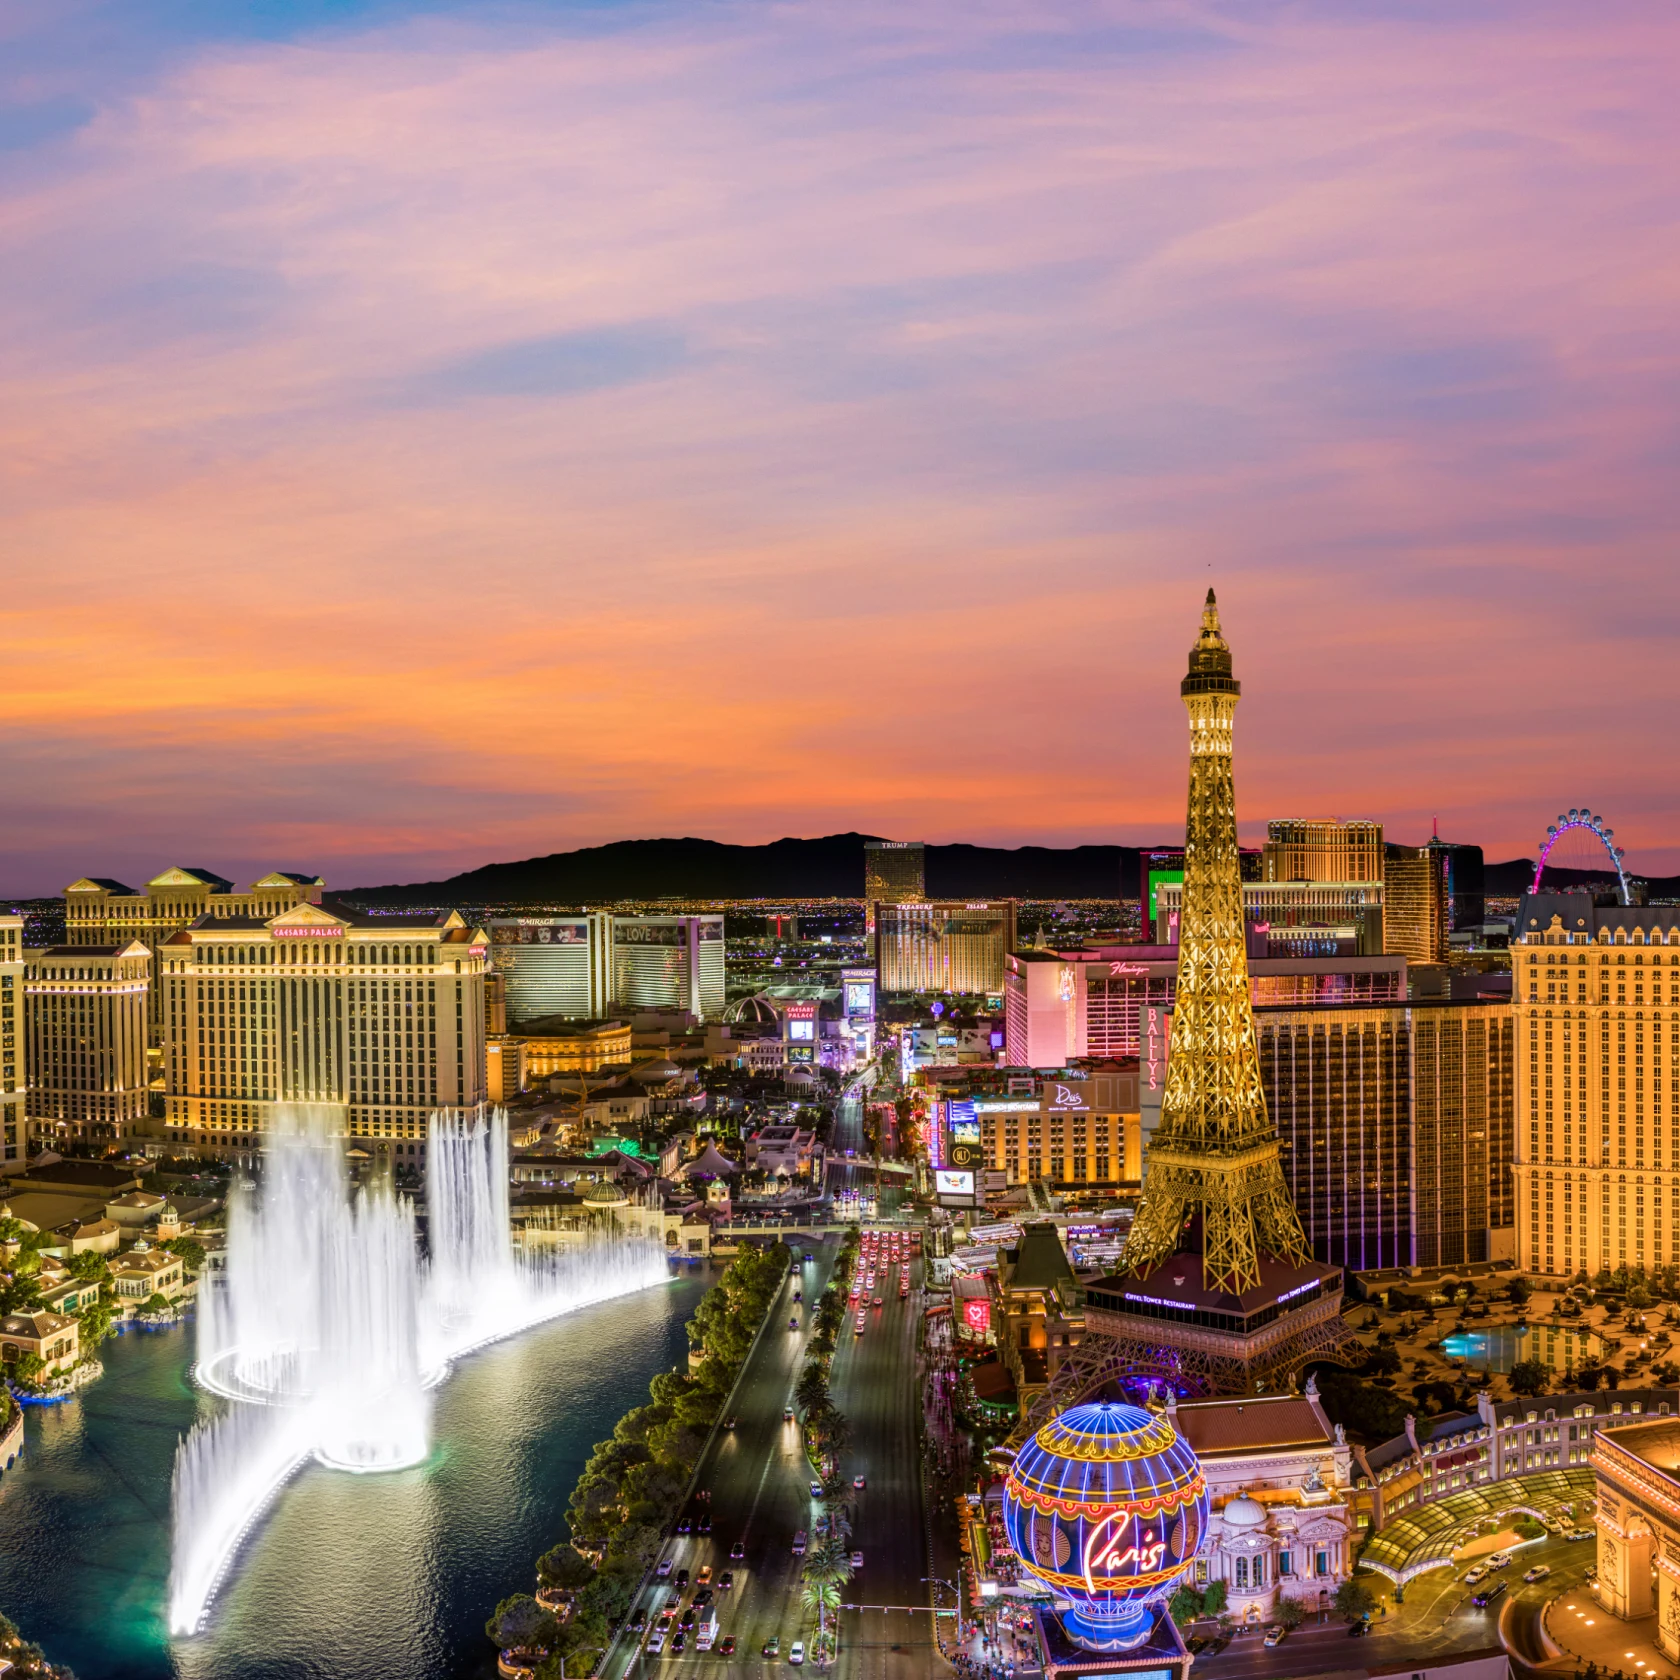 Distant overhead view of the Las Vegas Strip at sunset.
